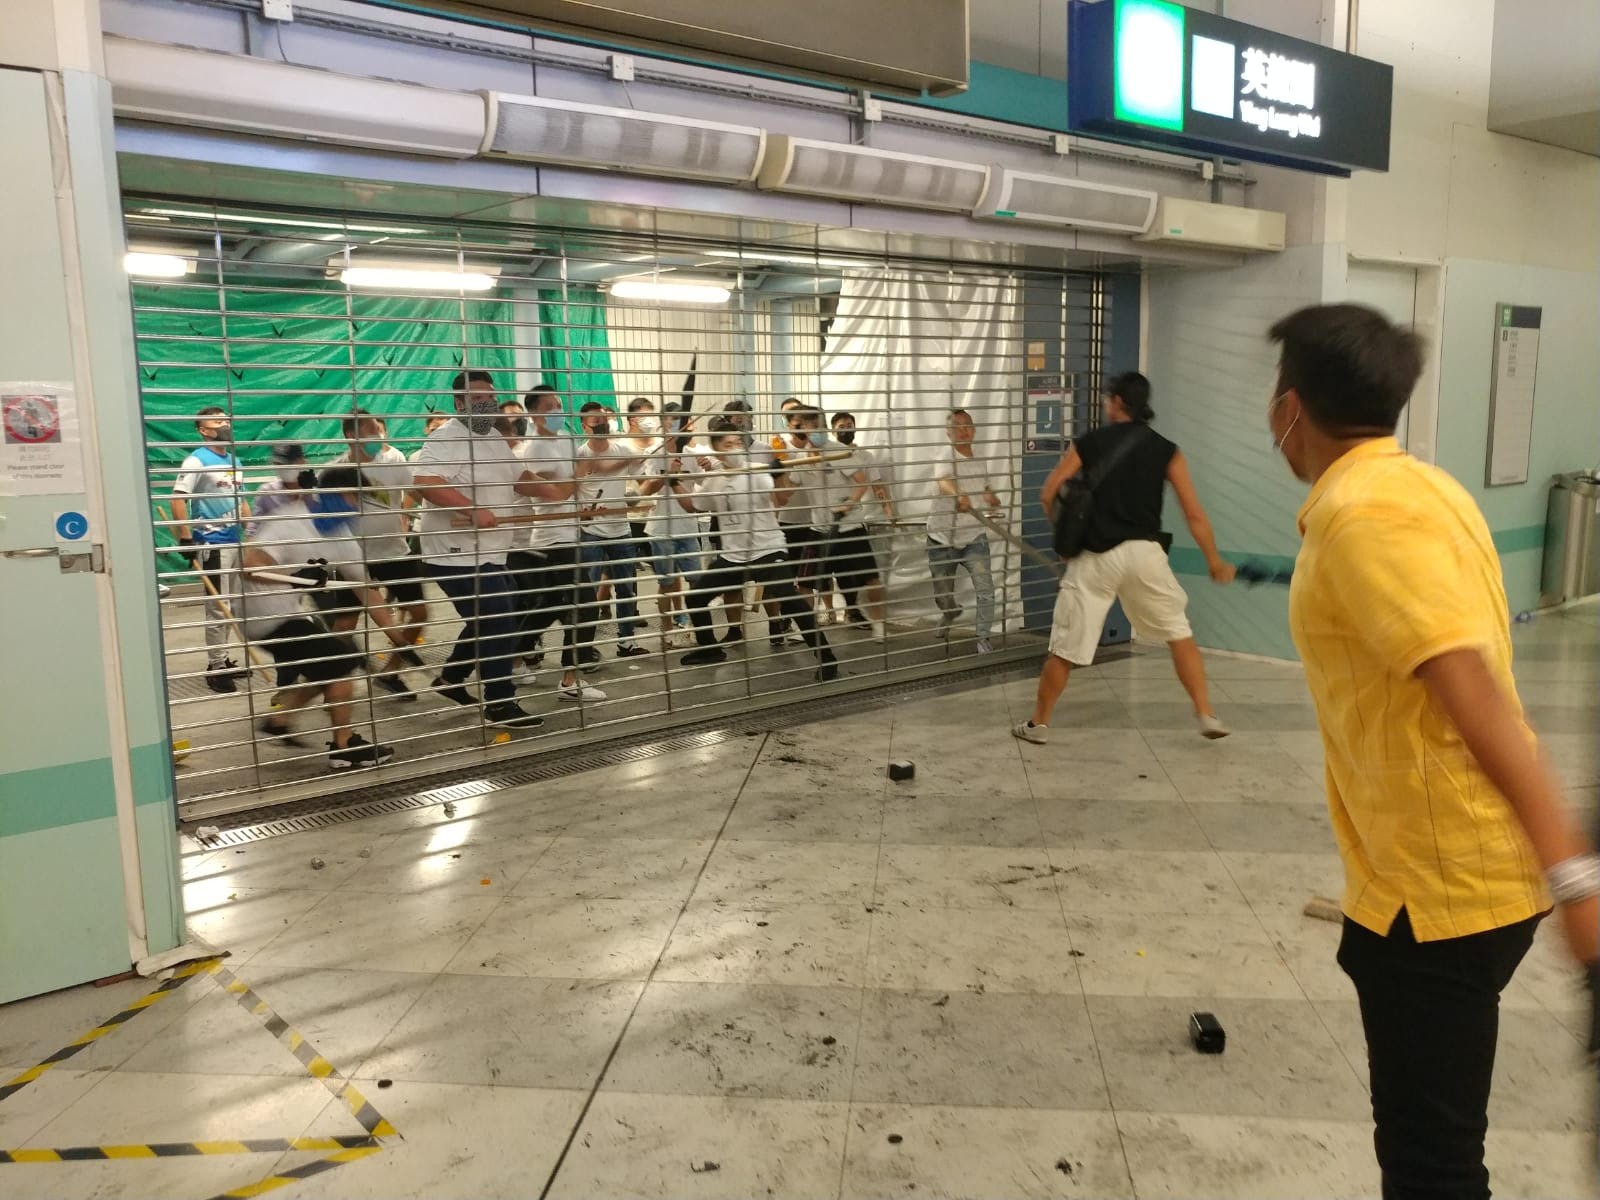 A mob of men in white T-shirts try to force open shutters at Yuen Long station. Photo: Handout